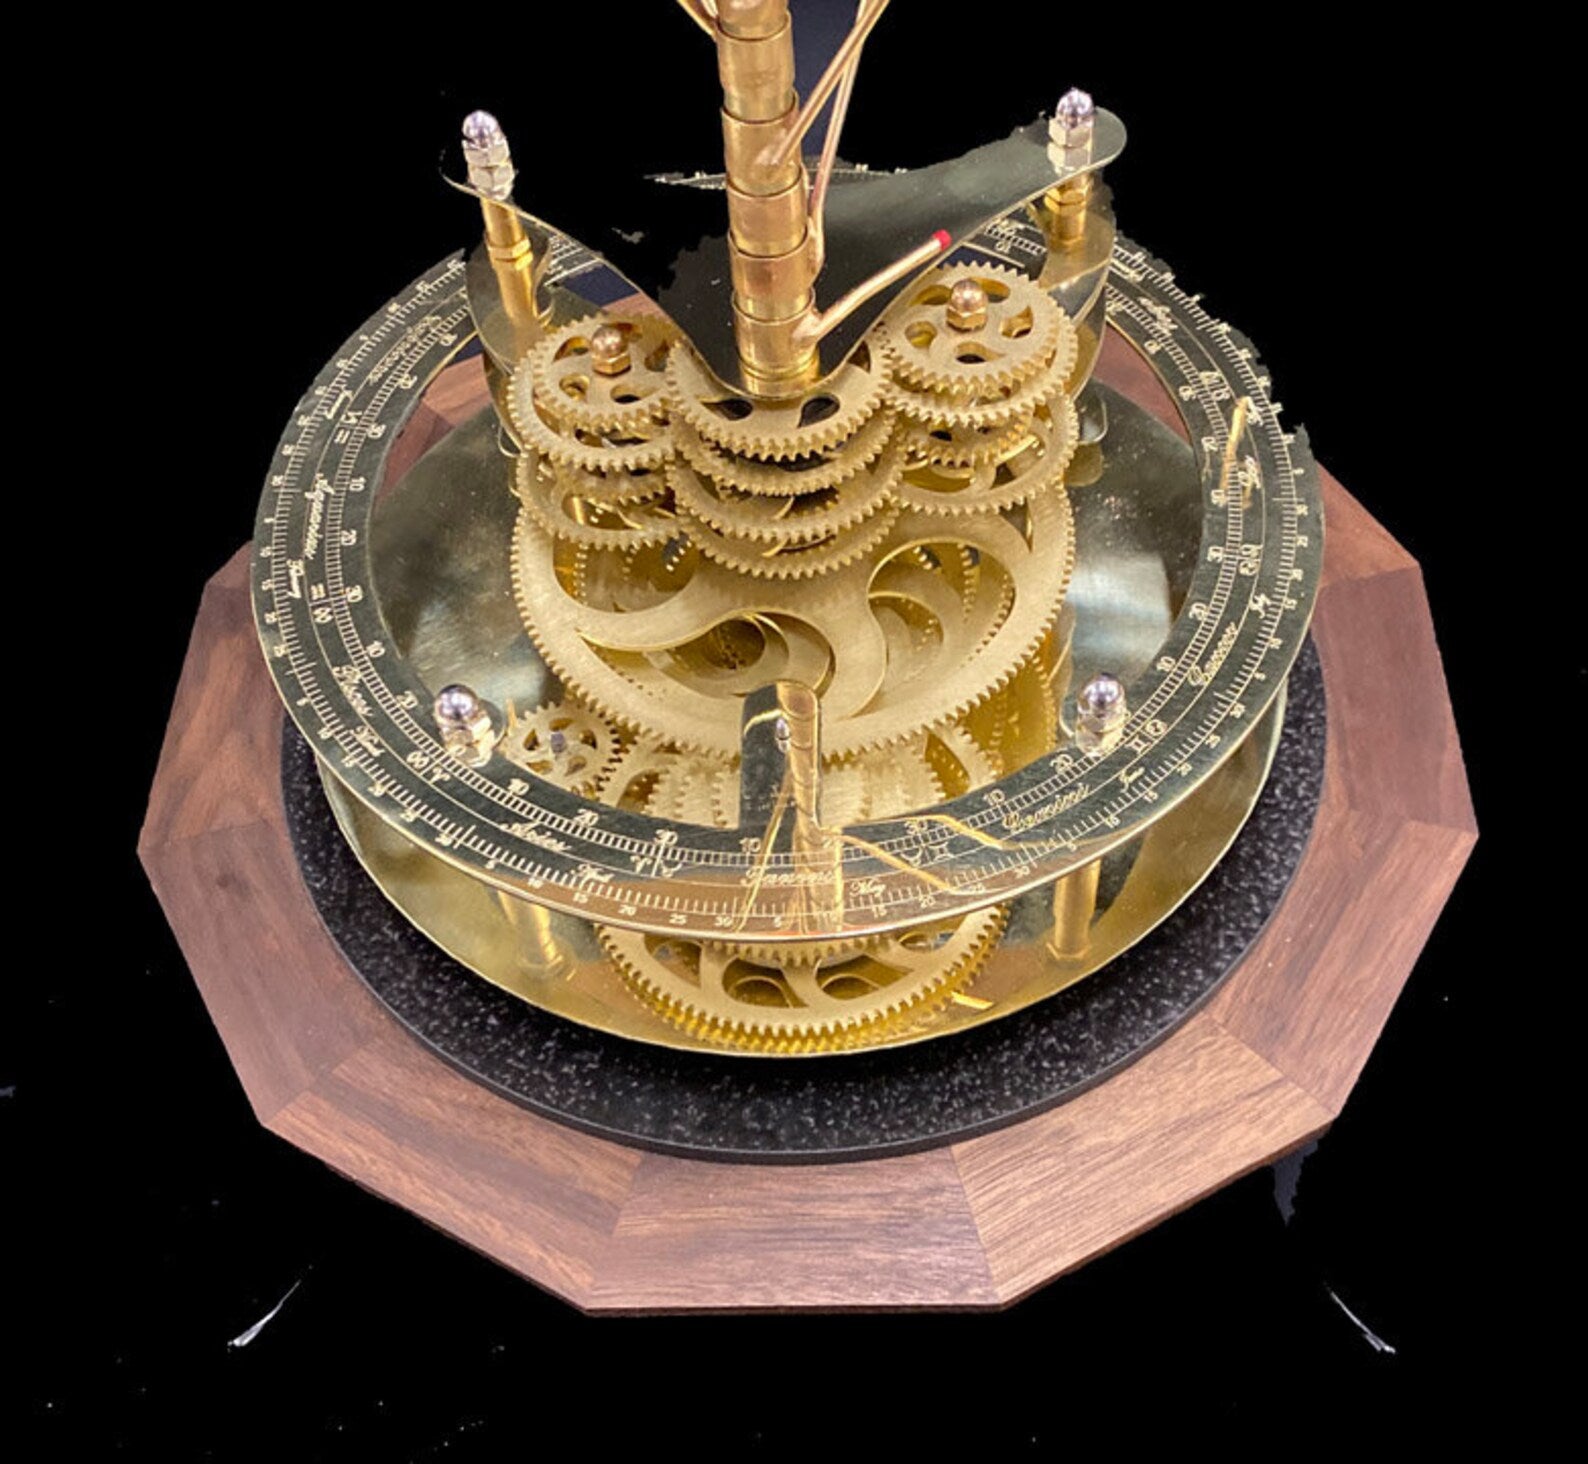 Close up photograph of Renaissance orrery depicting the solid brass gearwork of the orrery on a solid walnut base. A brass engraved calendar ring sits above the brass gearwork.